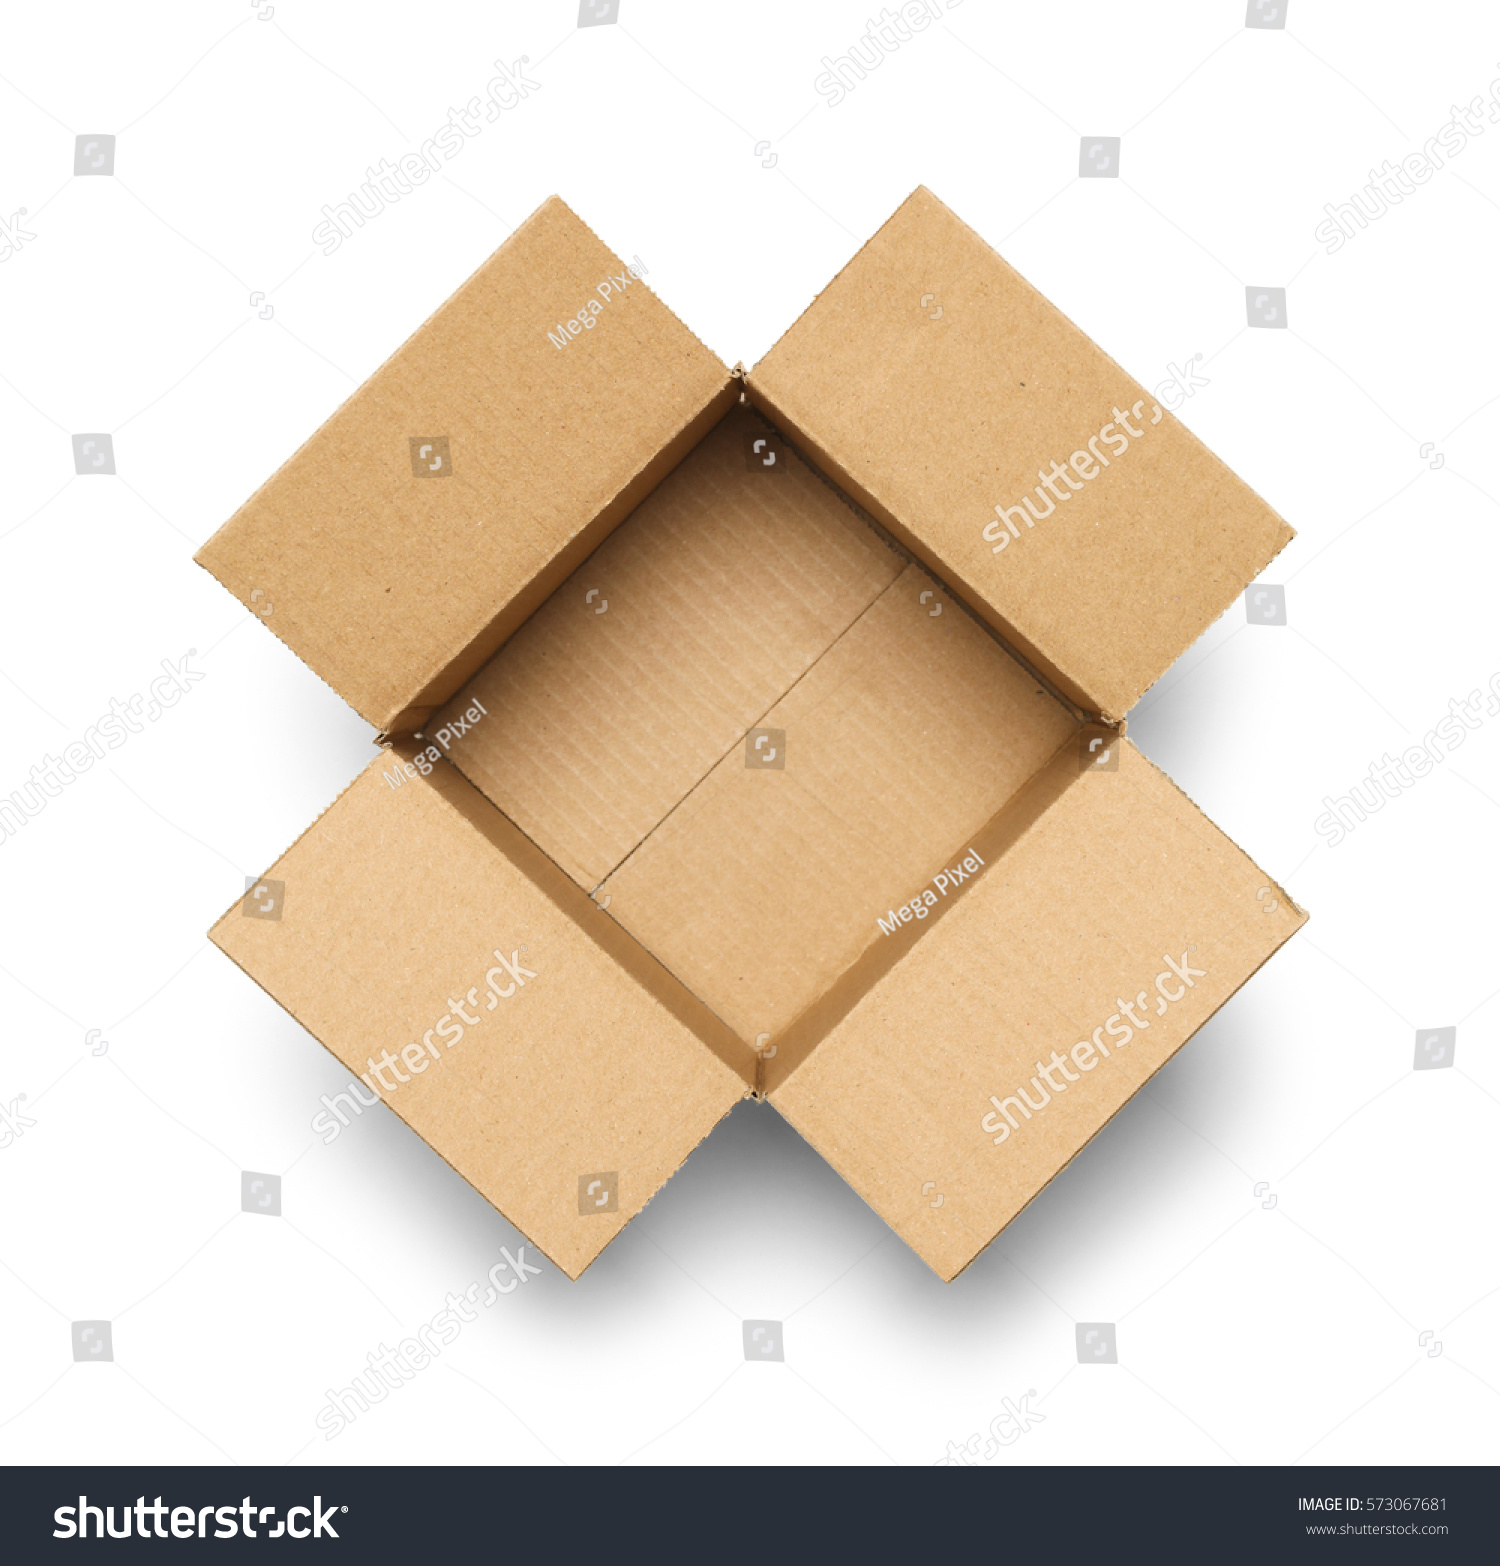 Open Empty Cardboard Box Isolated on White Background. #573067681